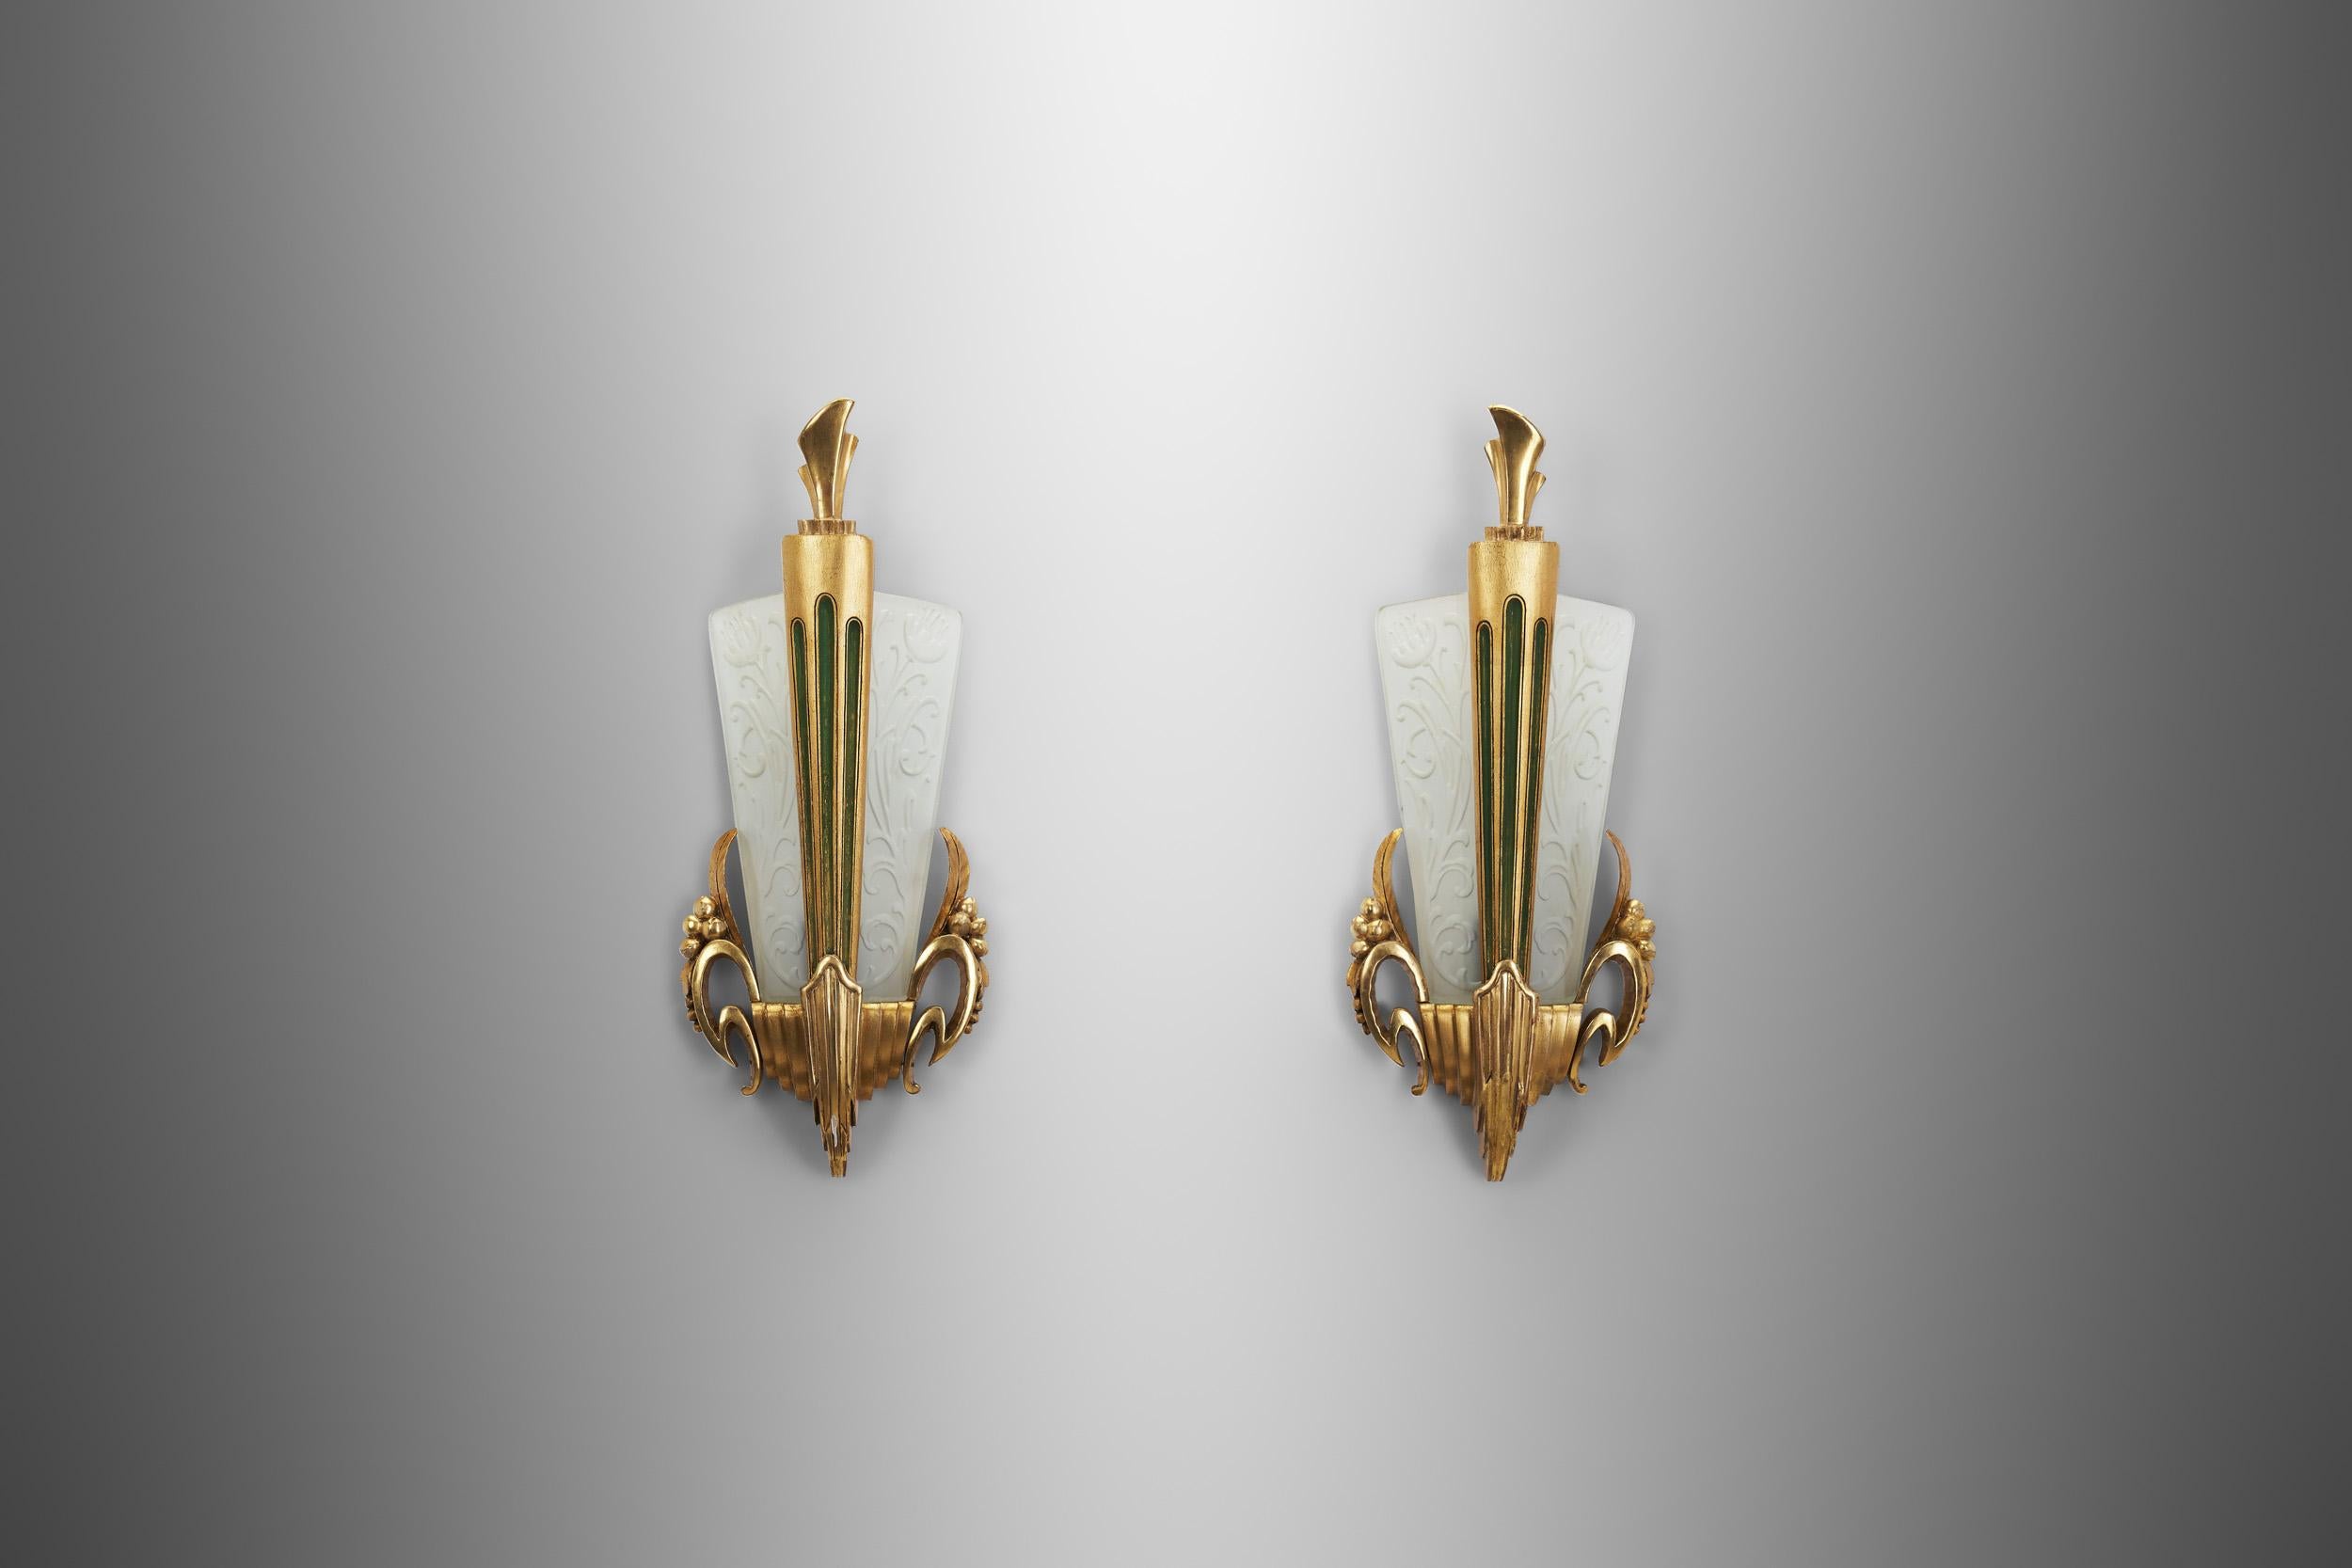 Glass and Giltwood Wall Lights by Broman, Europe Early 20th Century For Sale 2